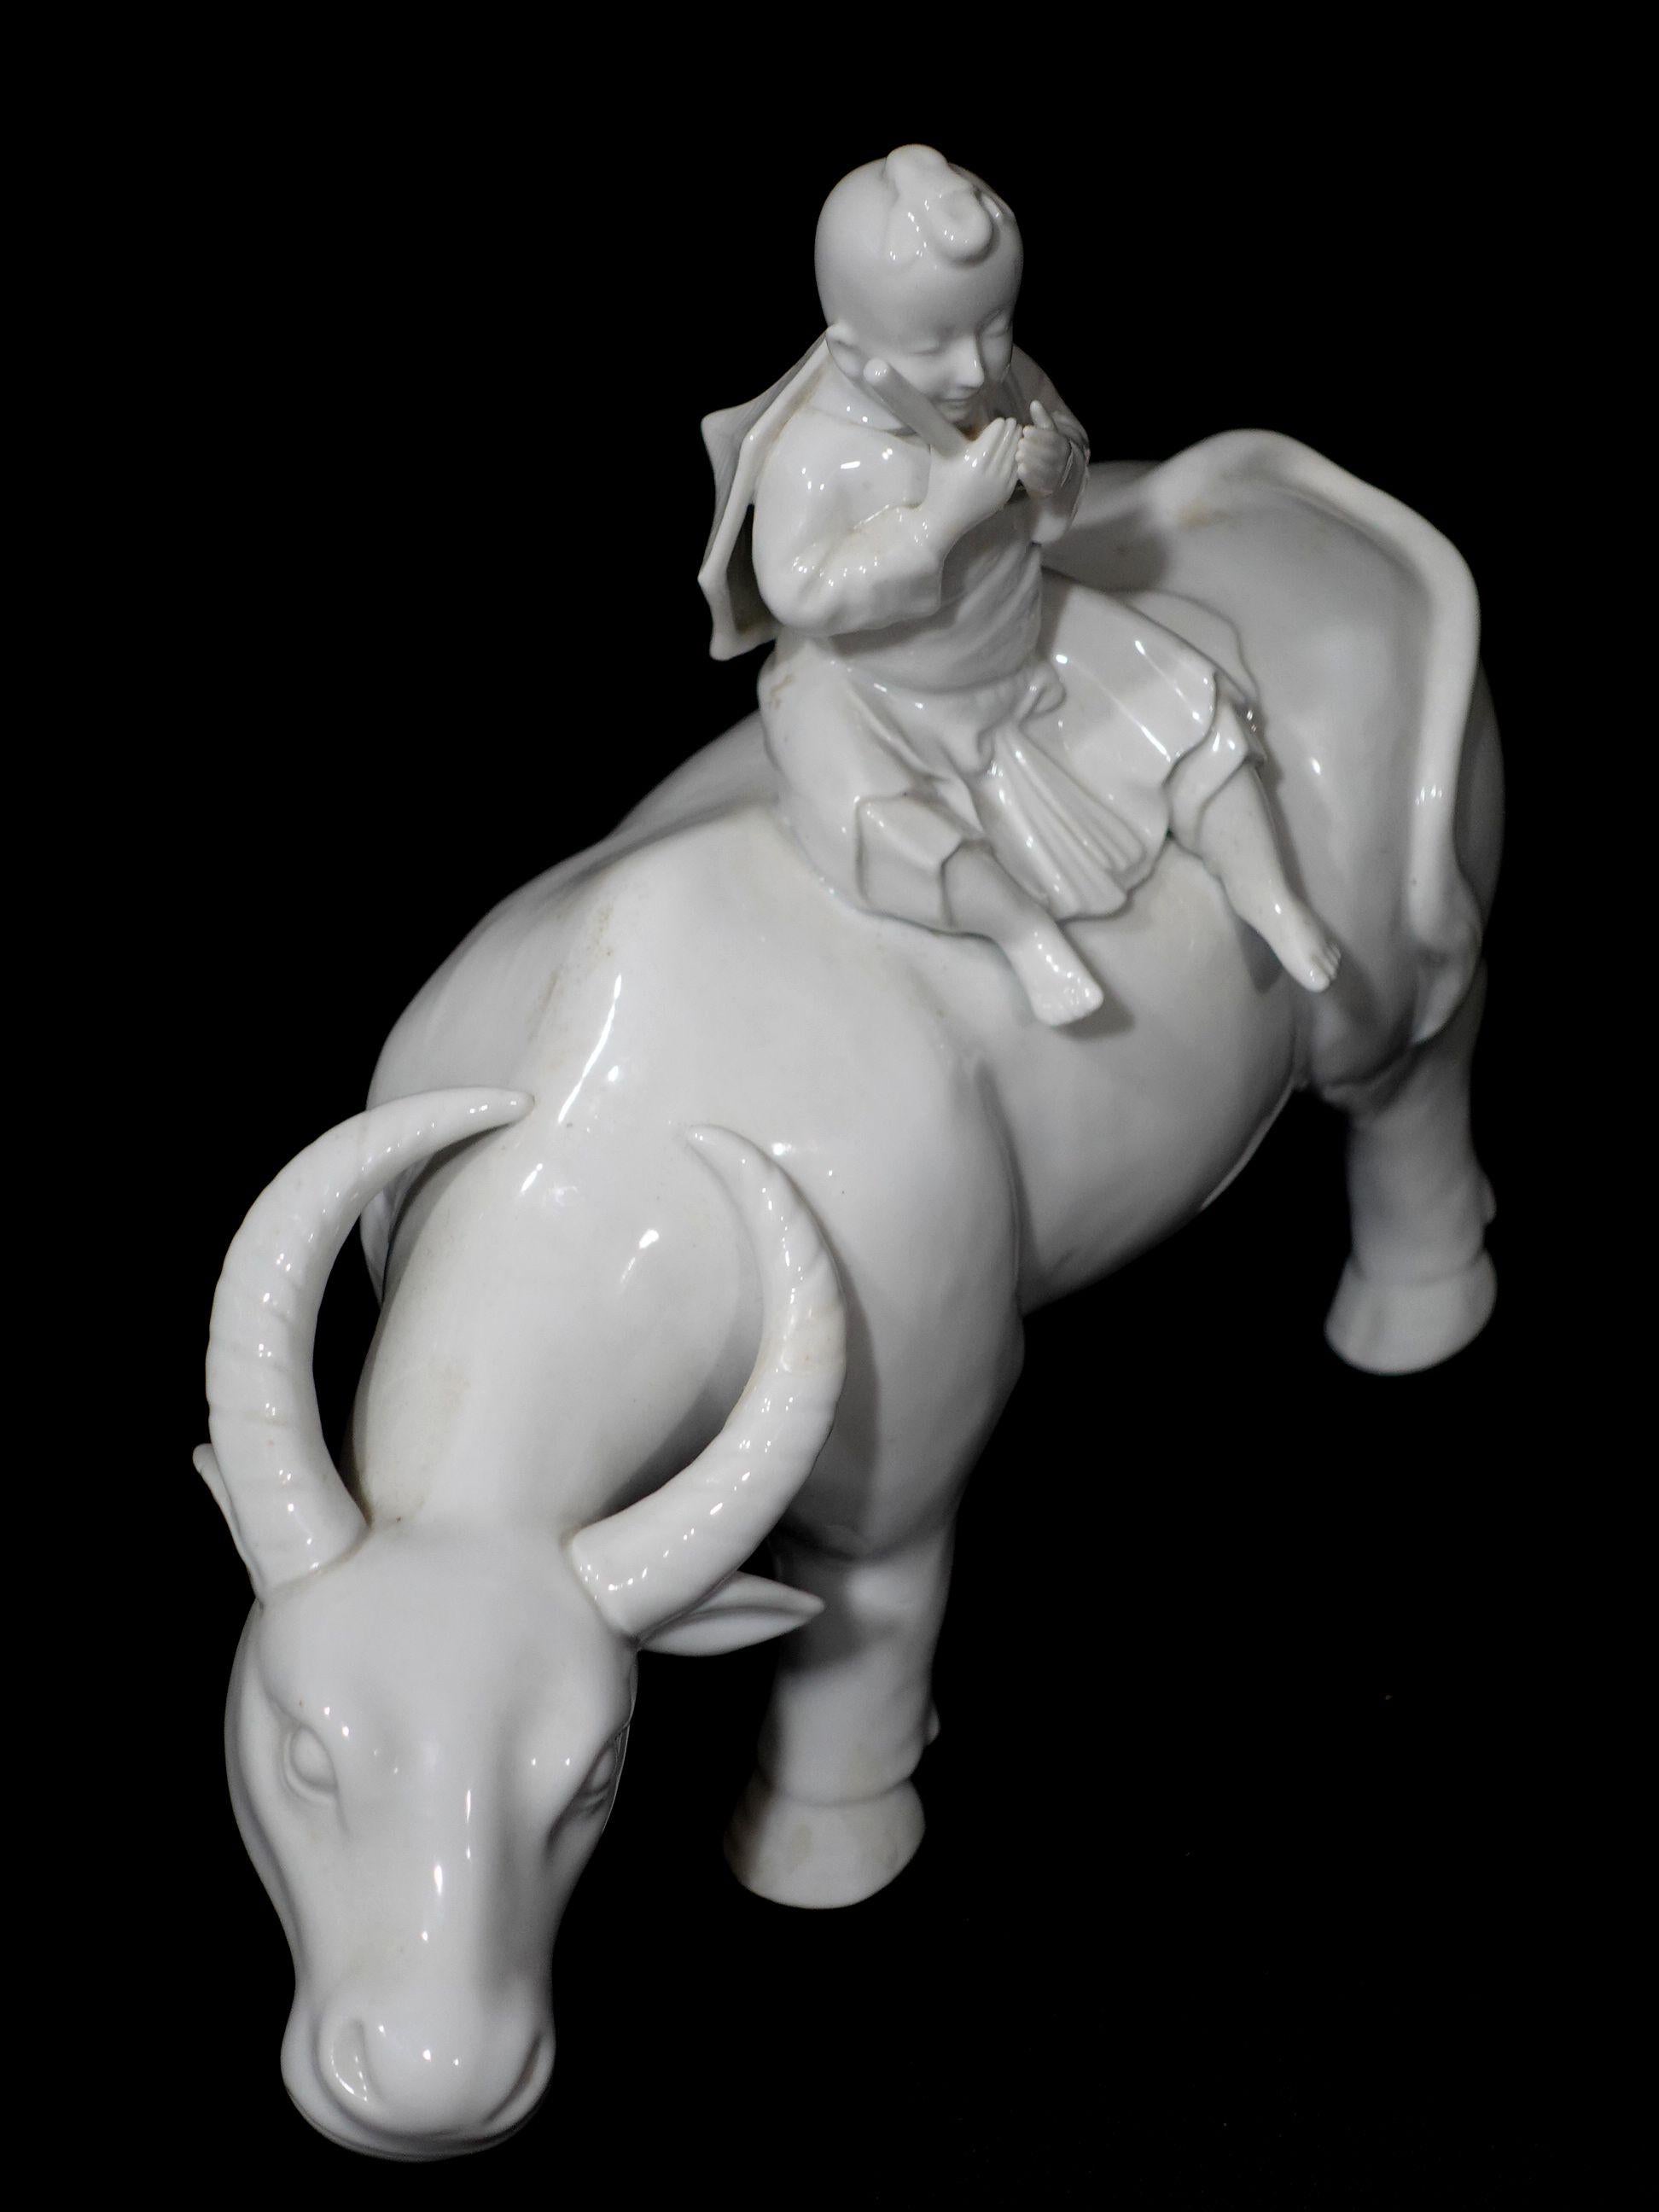 Chinese Export Porcelain Blanc de chine Water Buffalo with Child Riding For Sale 2